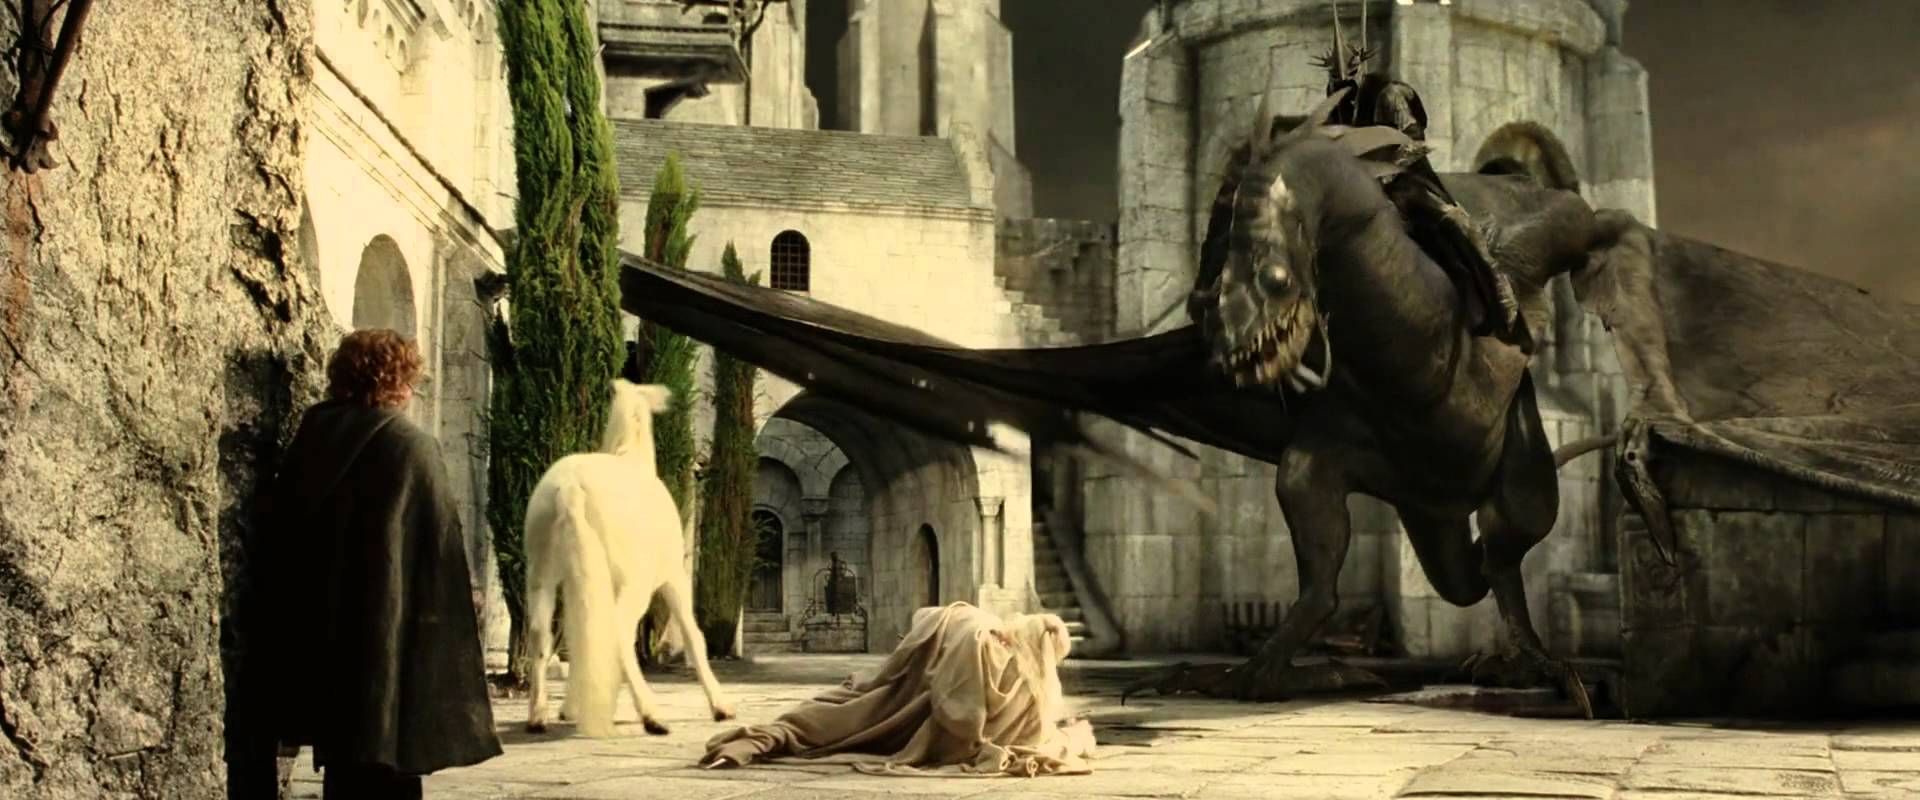 Witch-King Defeating Gandalf in Lord of the Rings